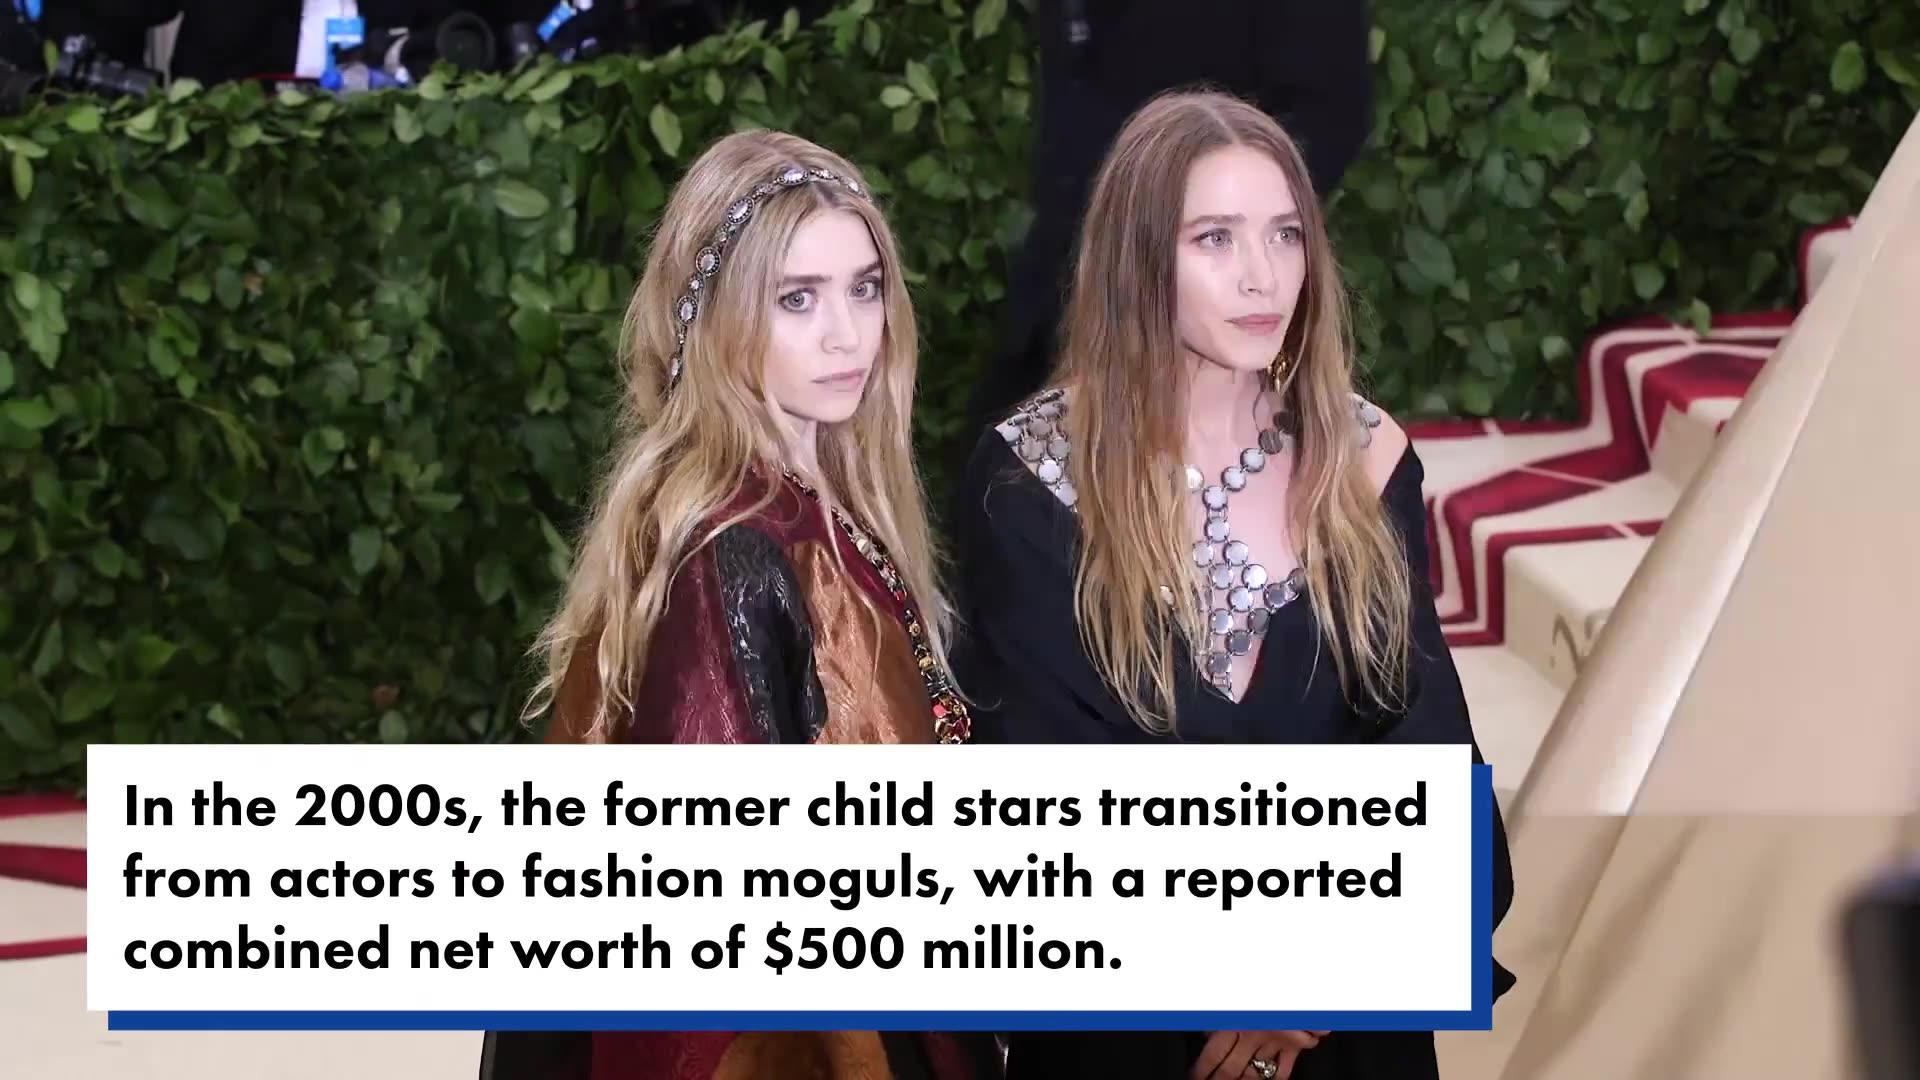 Mary-Kate and Ashley Olsen gave heartfelt speech to make amends with 'Full House' cast after Bob Saget's death